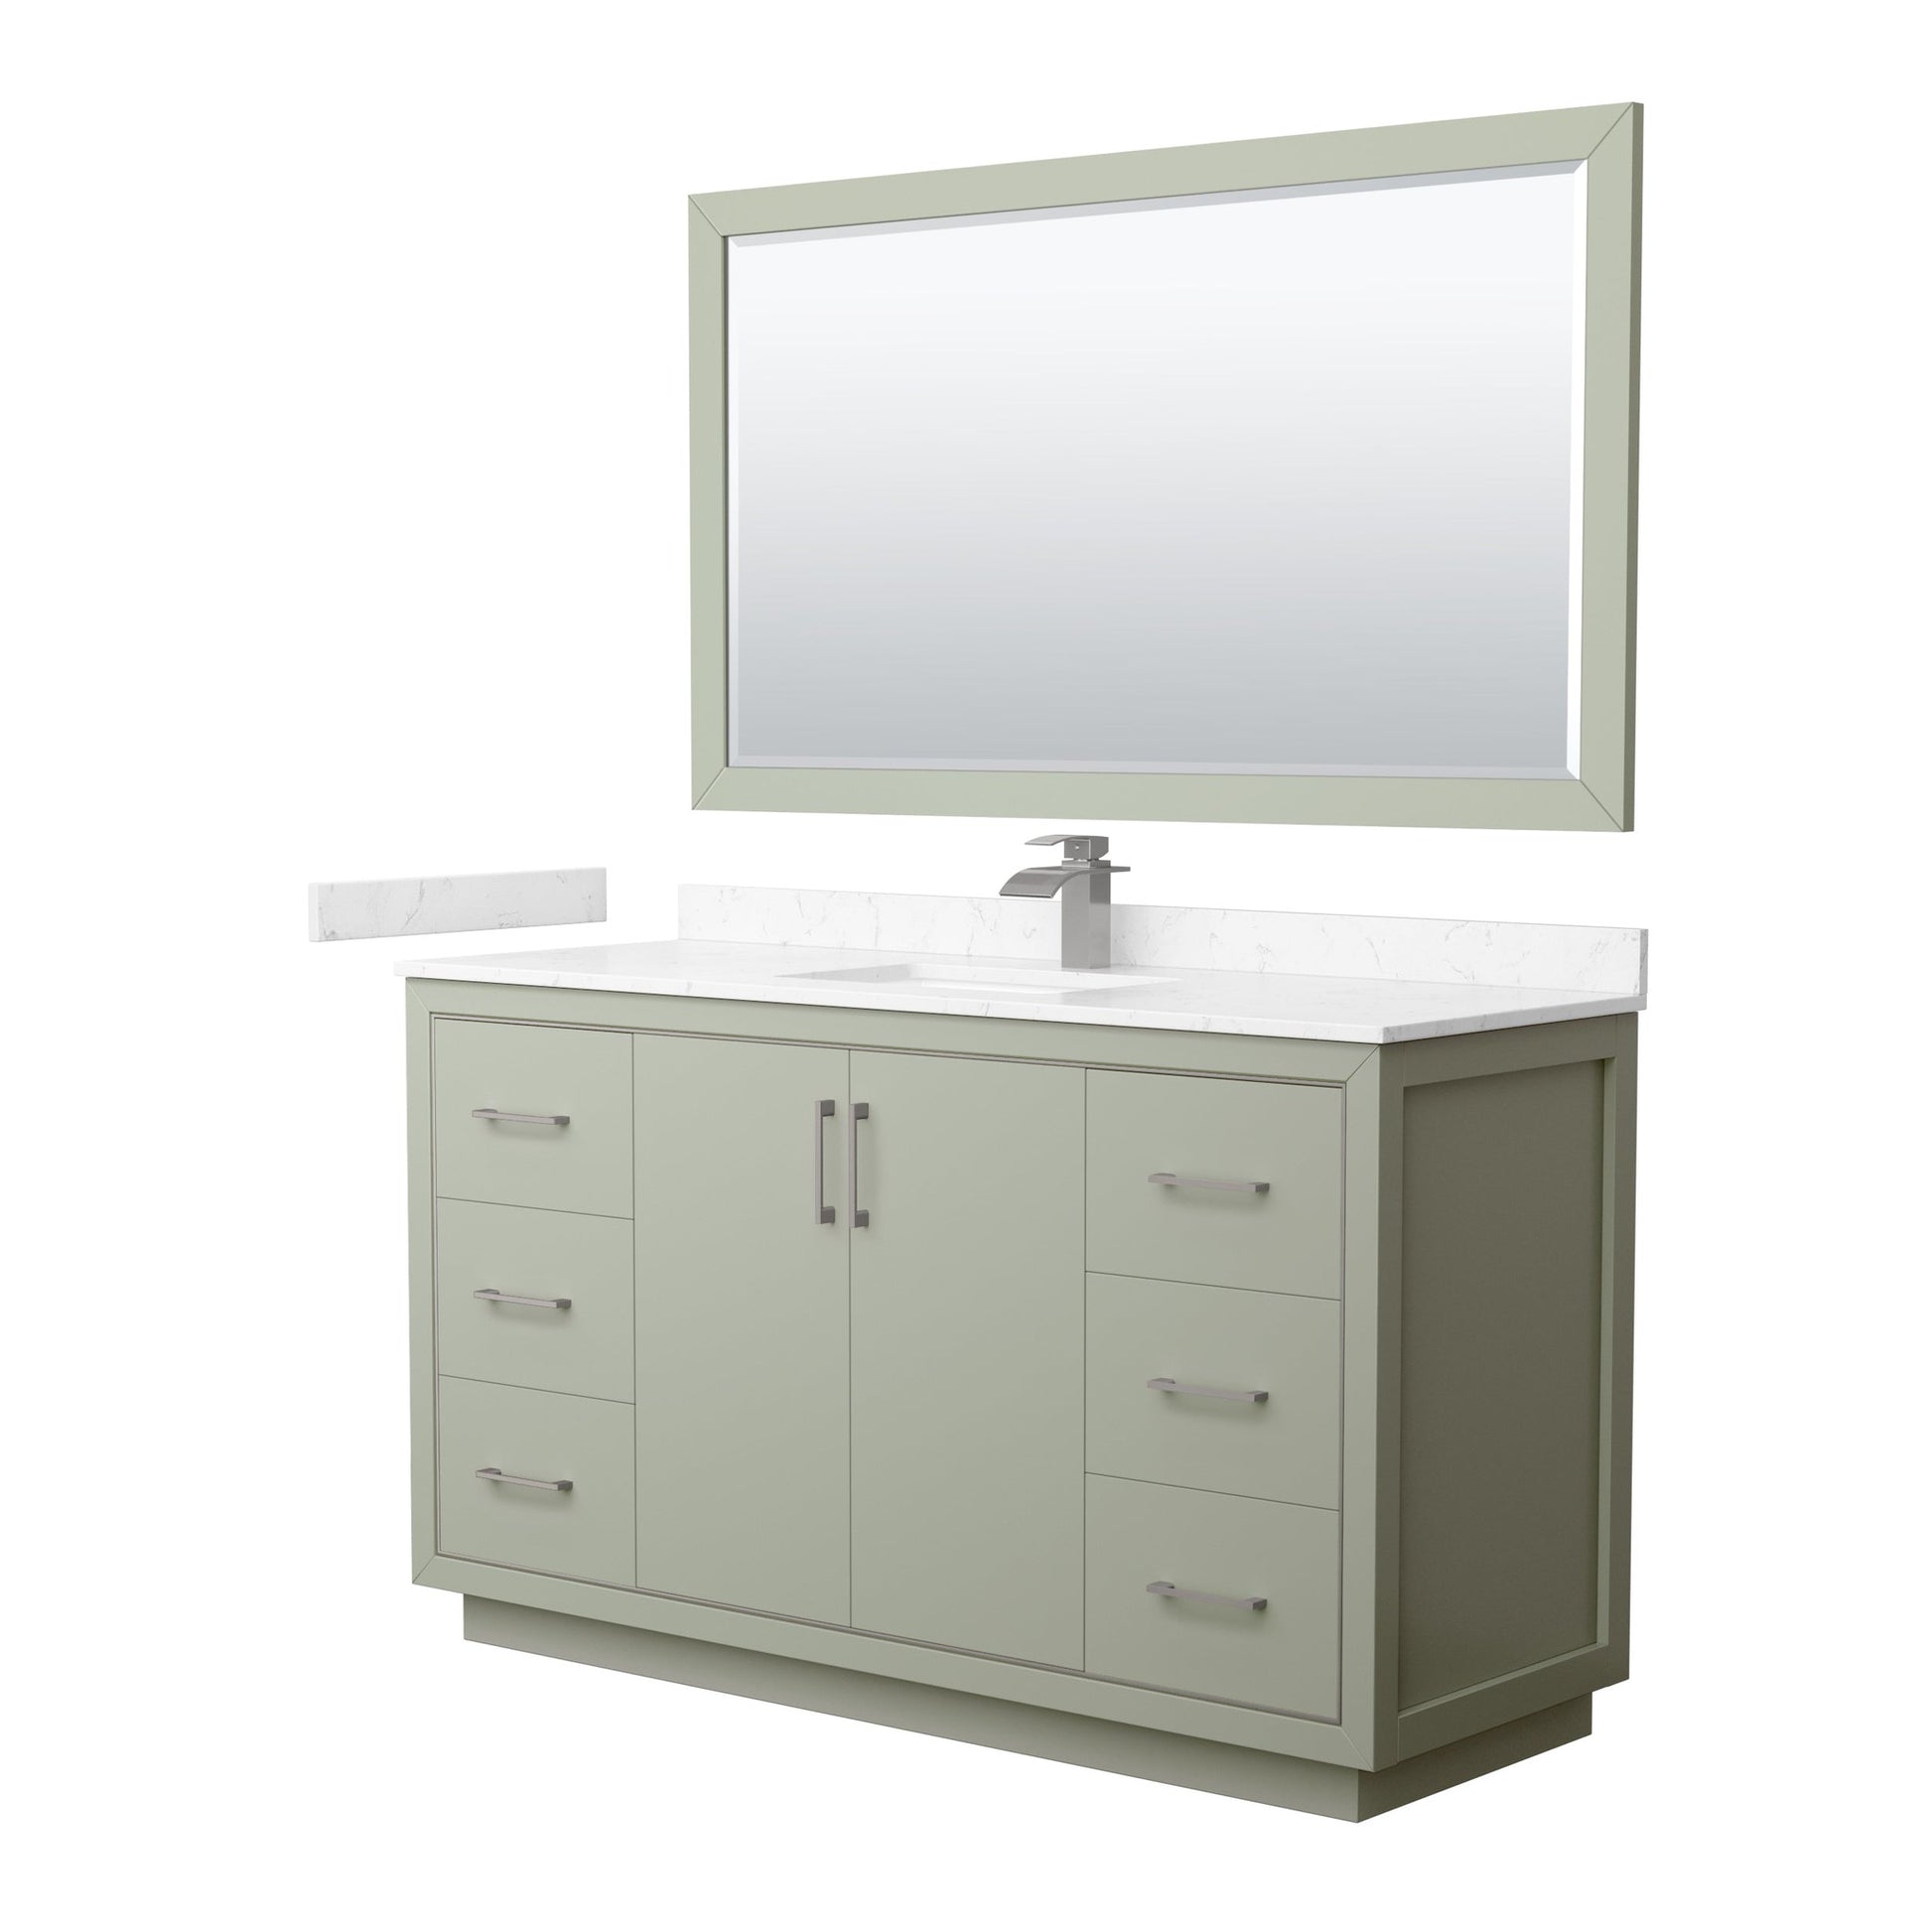 Wyndham Collection Icon 60" Single Bathroom Vanity in Light Green, Carrara Cultured Marble Countertop, Undermount Square Sink, Brushed Nickel Trim, 58" Mirror